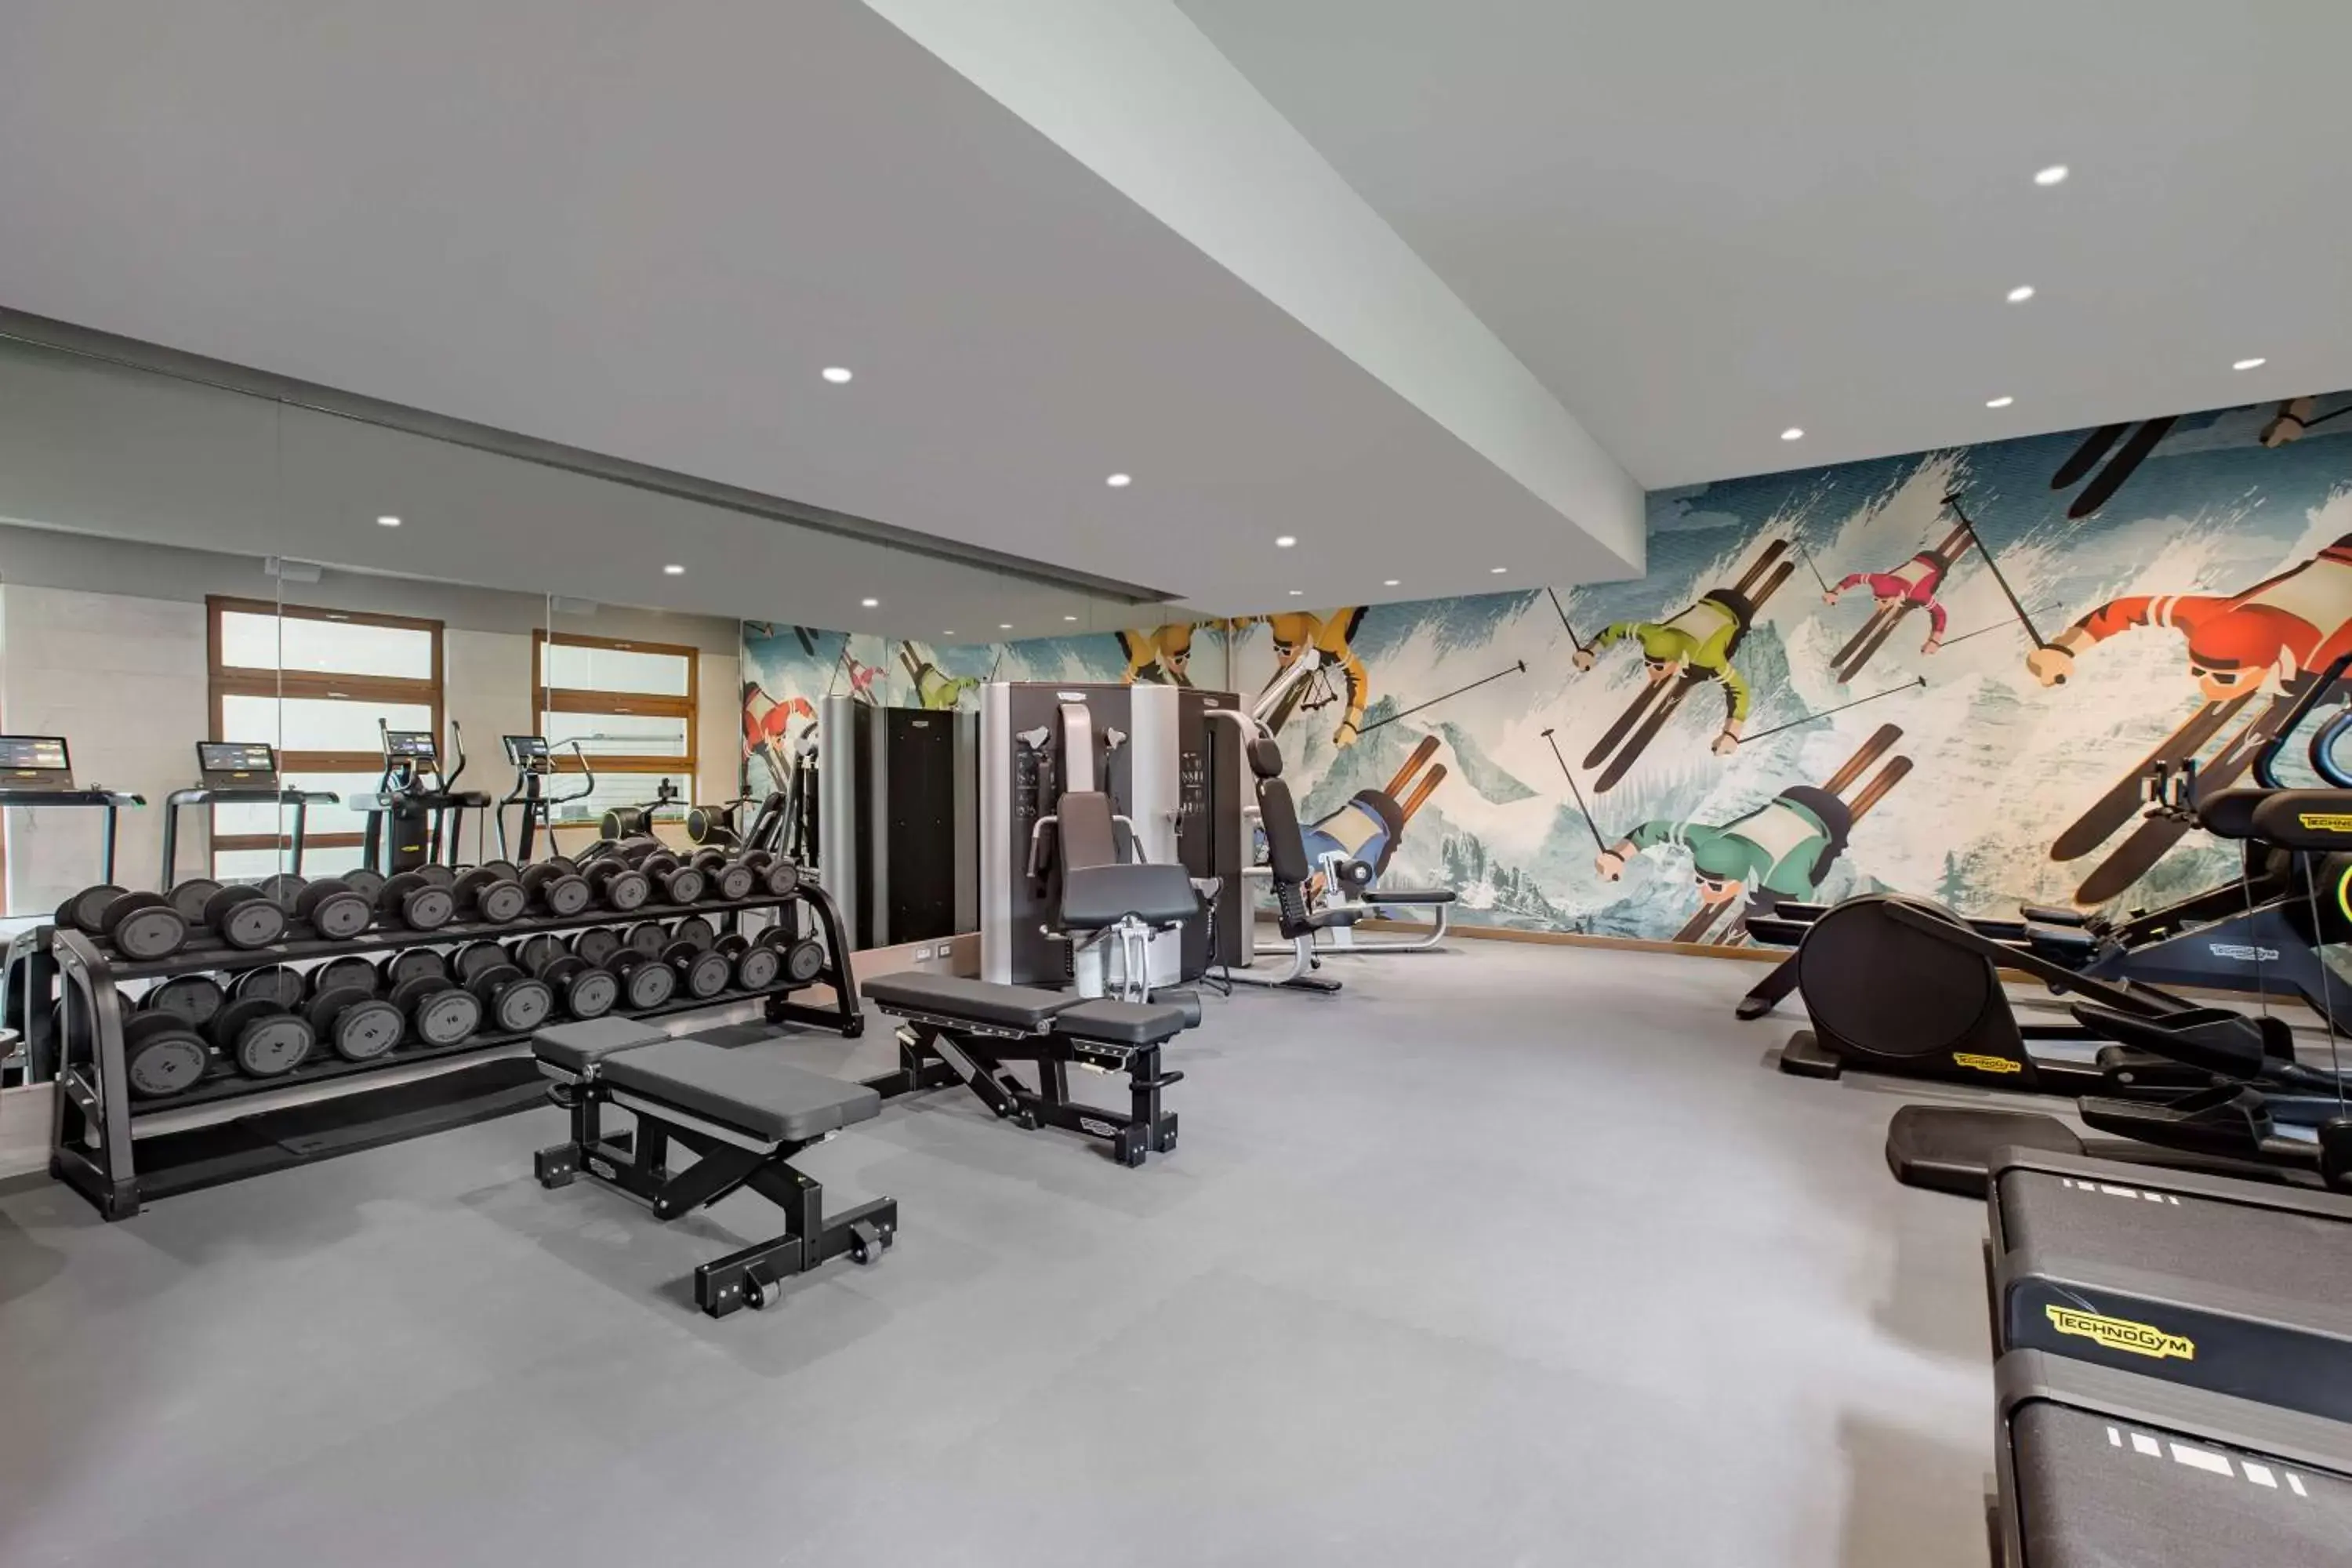 Activities, Fitness Center/Facilities in Grand Hotel Savoia Cortina d'Ampezzo, A Radisson Collection Hotel